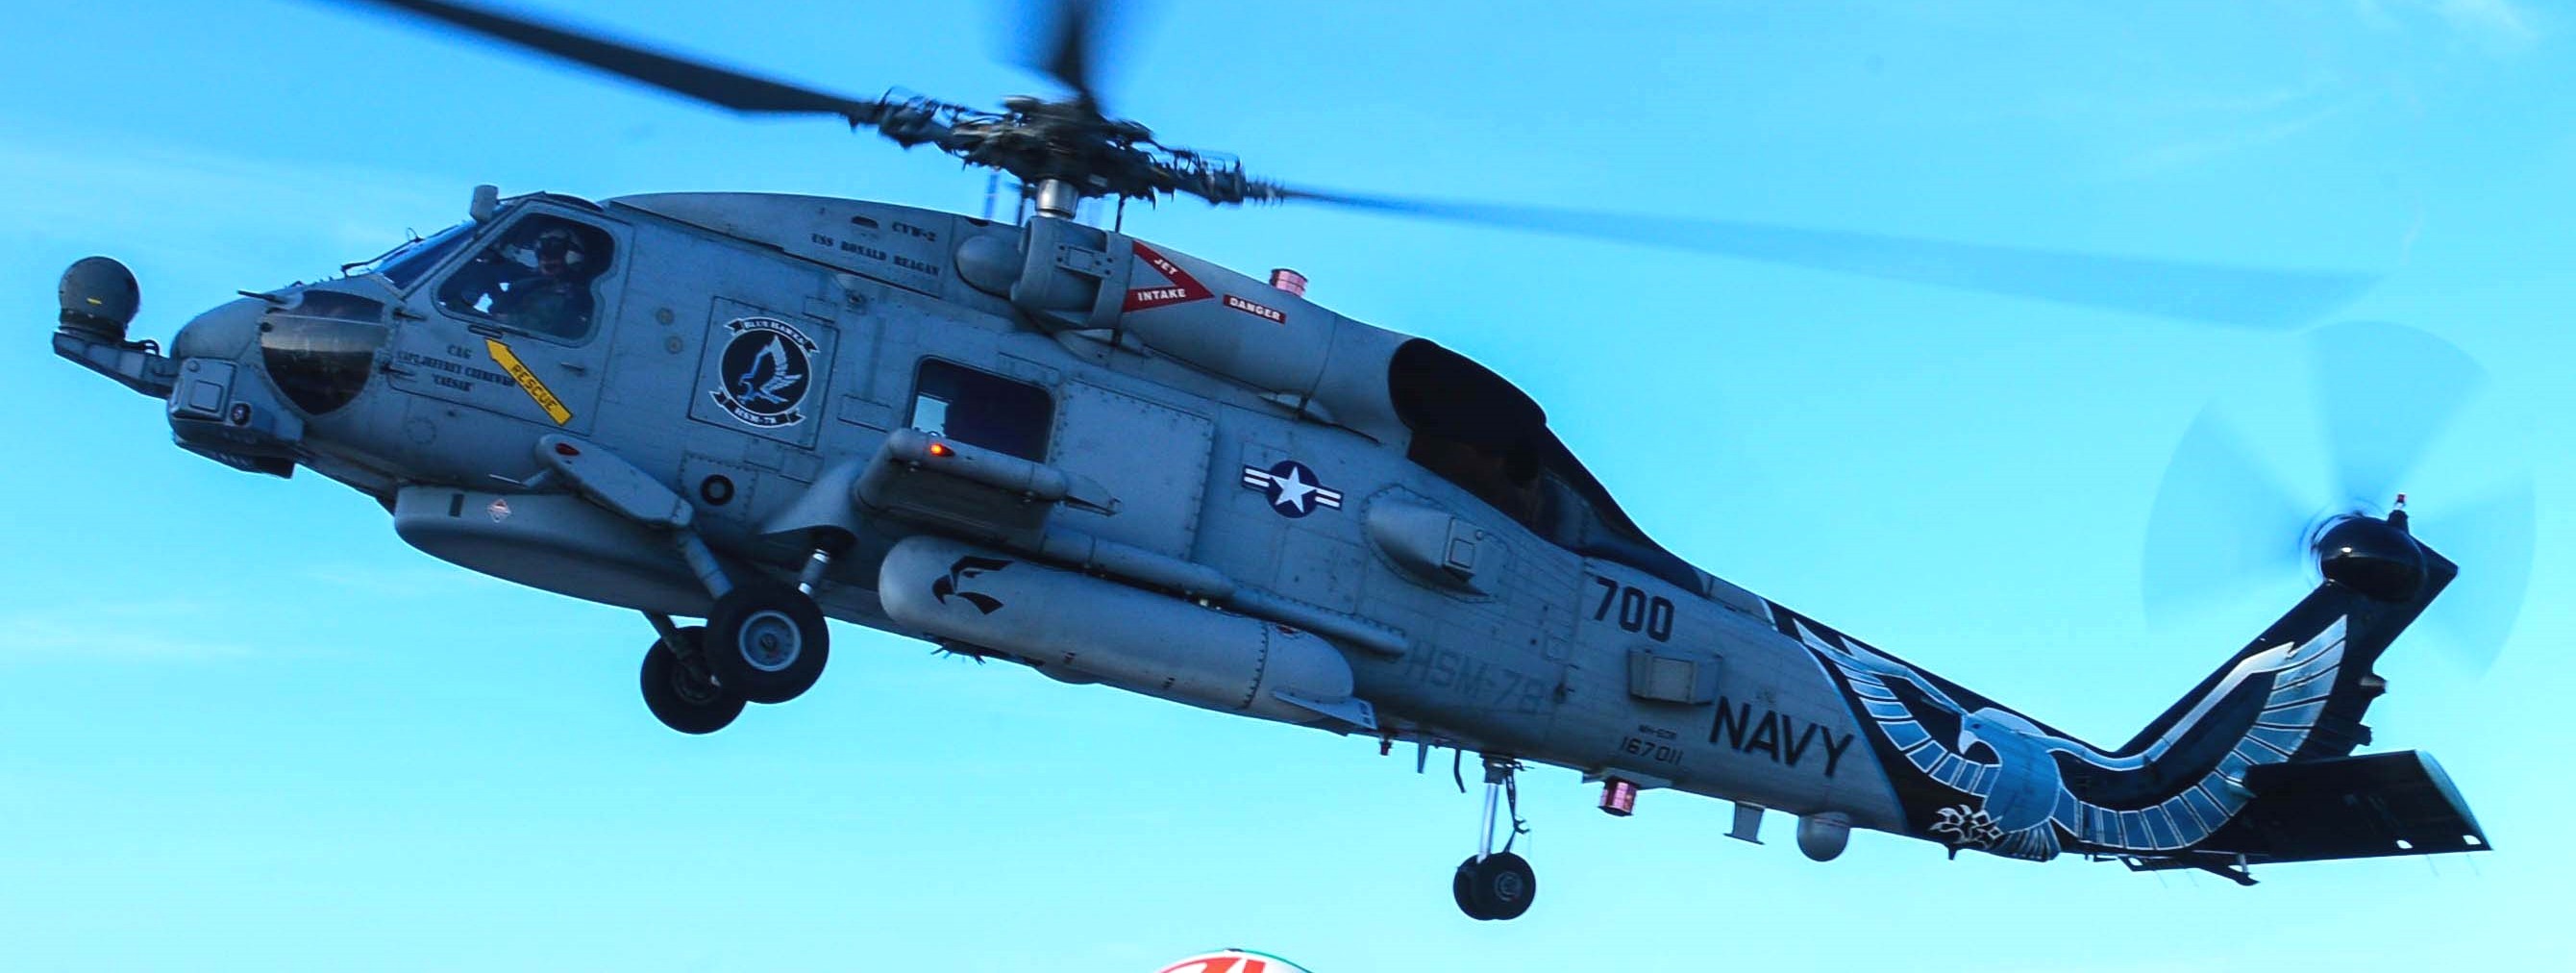 hsm-78 blue hawks helicopter maritime strike squadron mh-60r seahawk us navy 2014 29